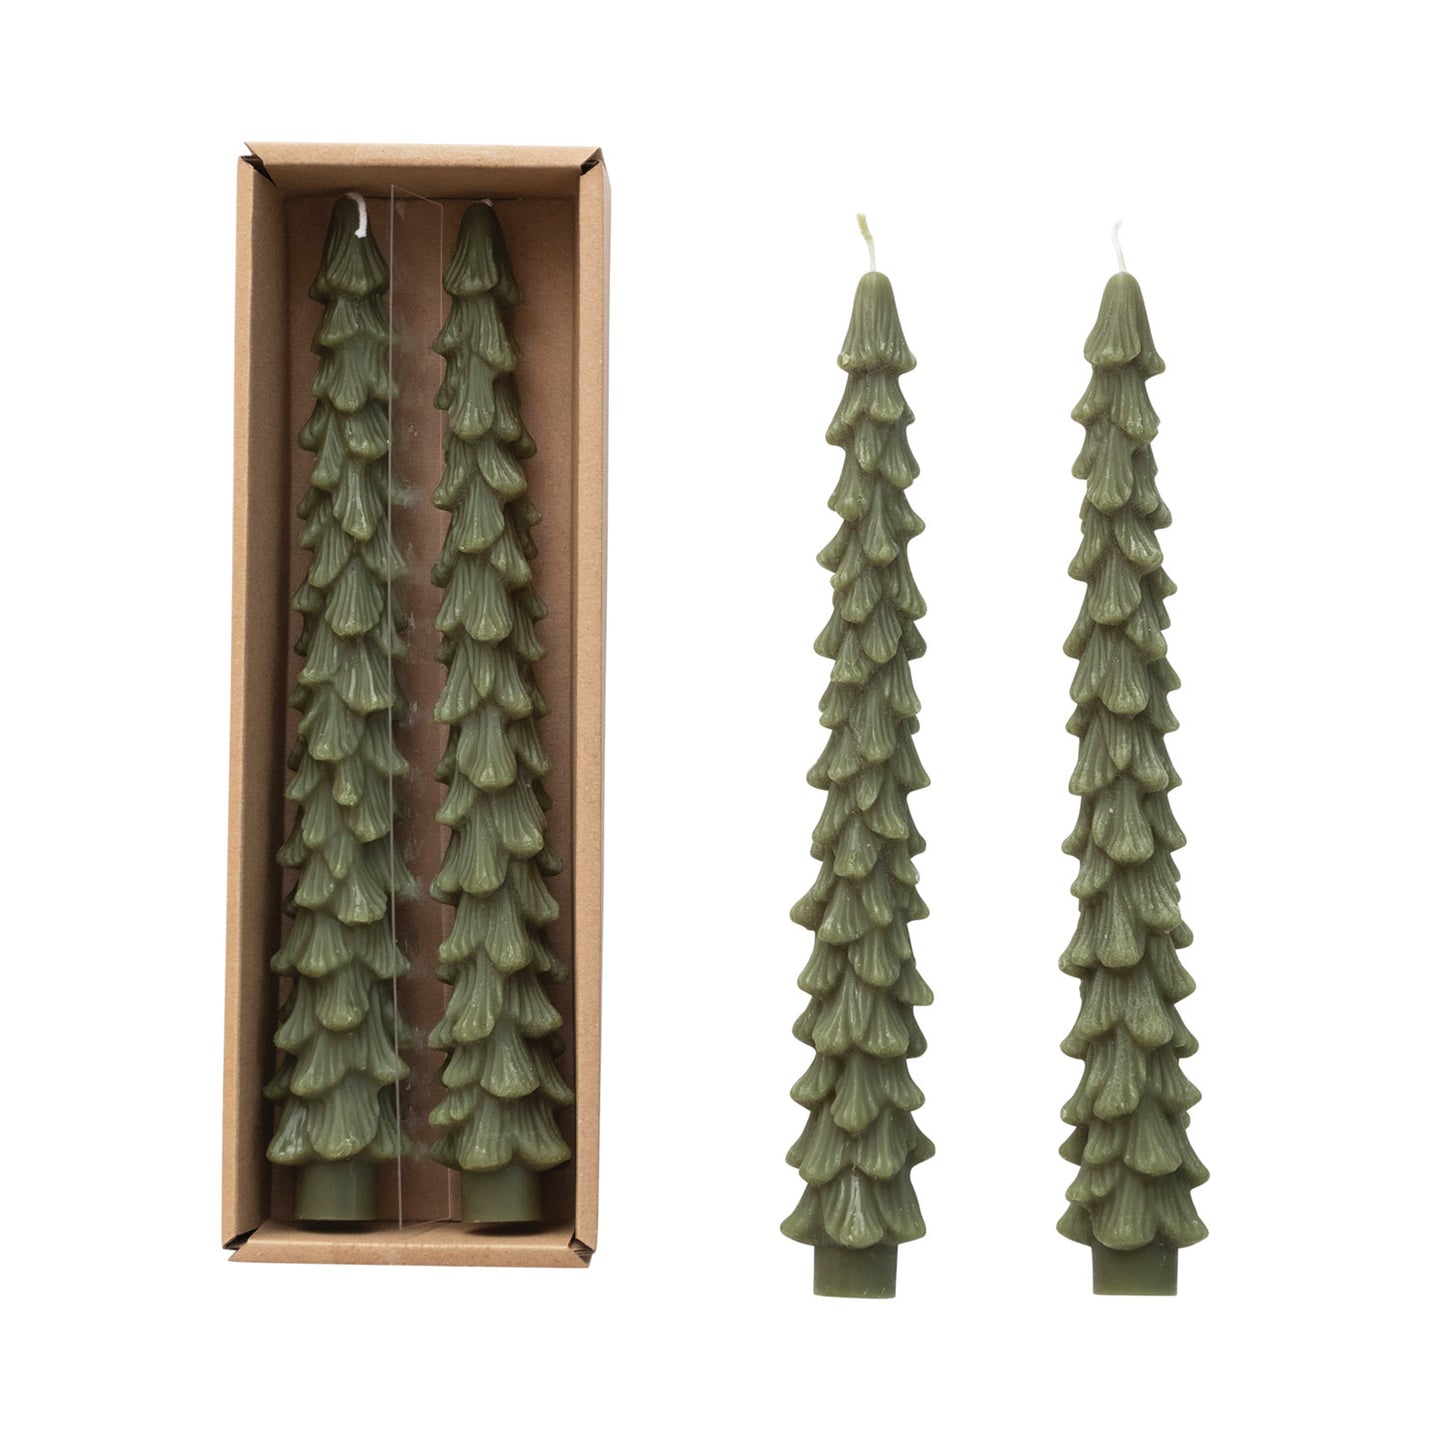 10"H Unscented Tree Shaped Taper Candles, set of 2